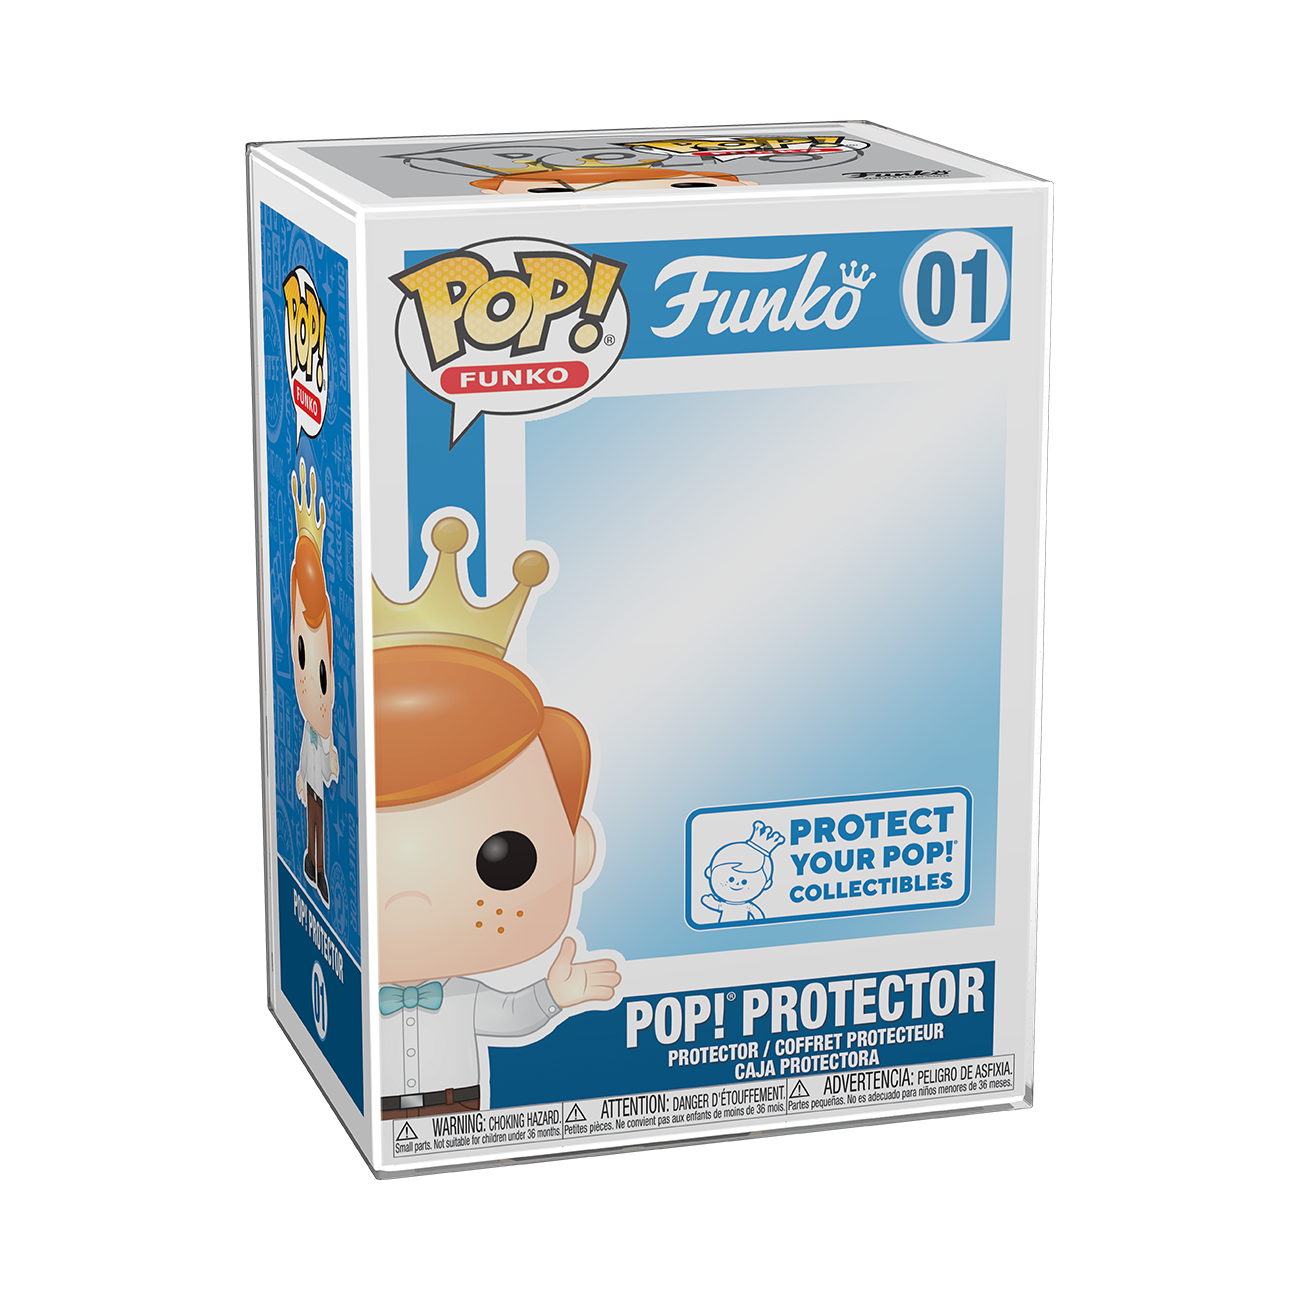 Beyond 2.0 (new wave) .60mm Pop Protector Display Case for Funko Vinyl  Figures Protector - Regular 4 Size - Extreme Thickness UV Protection